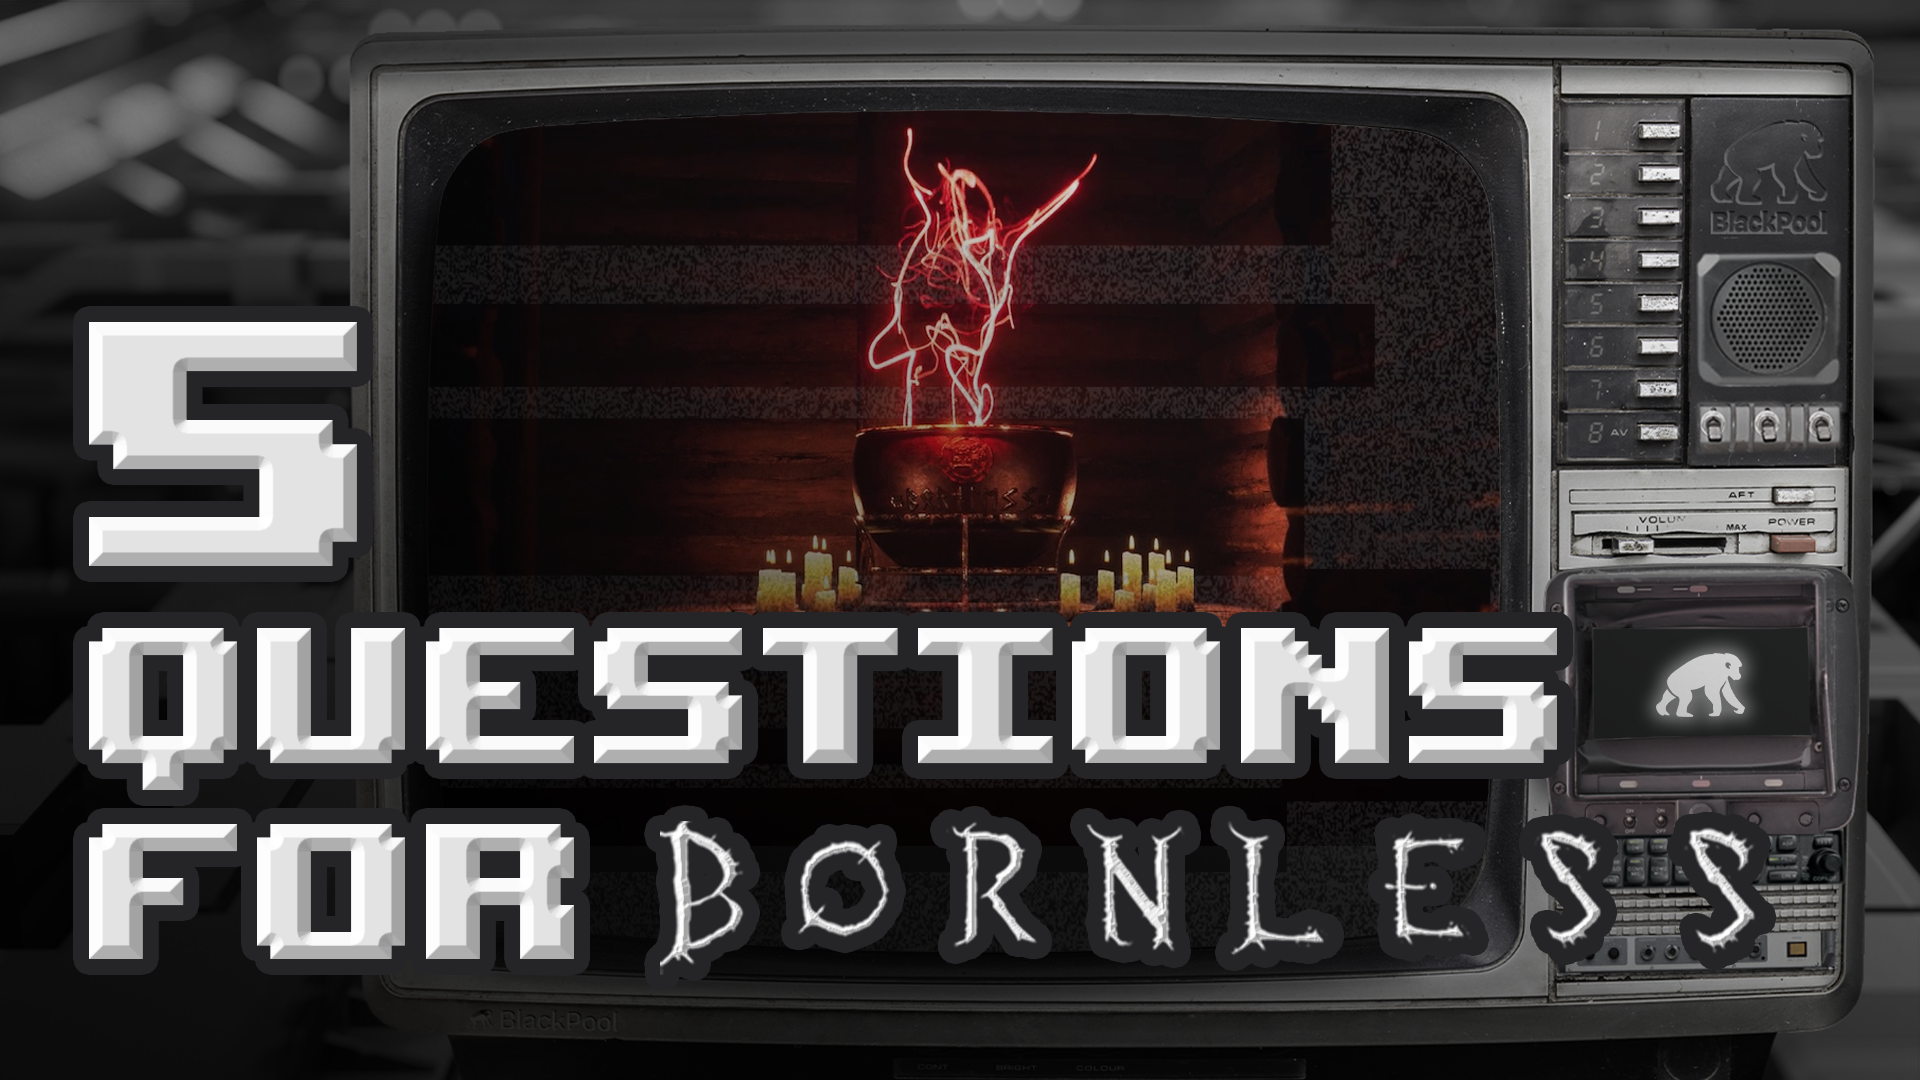 5 Questions for Bornless